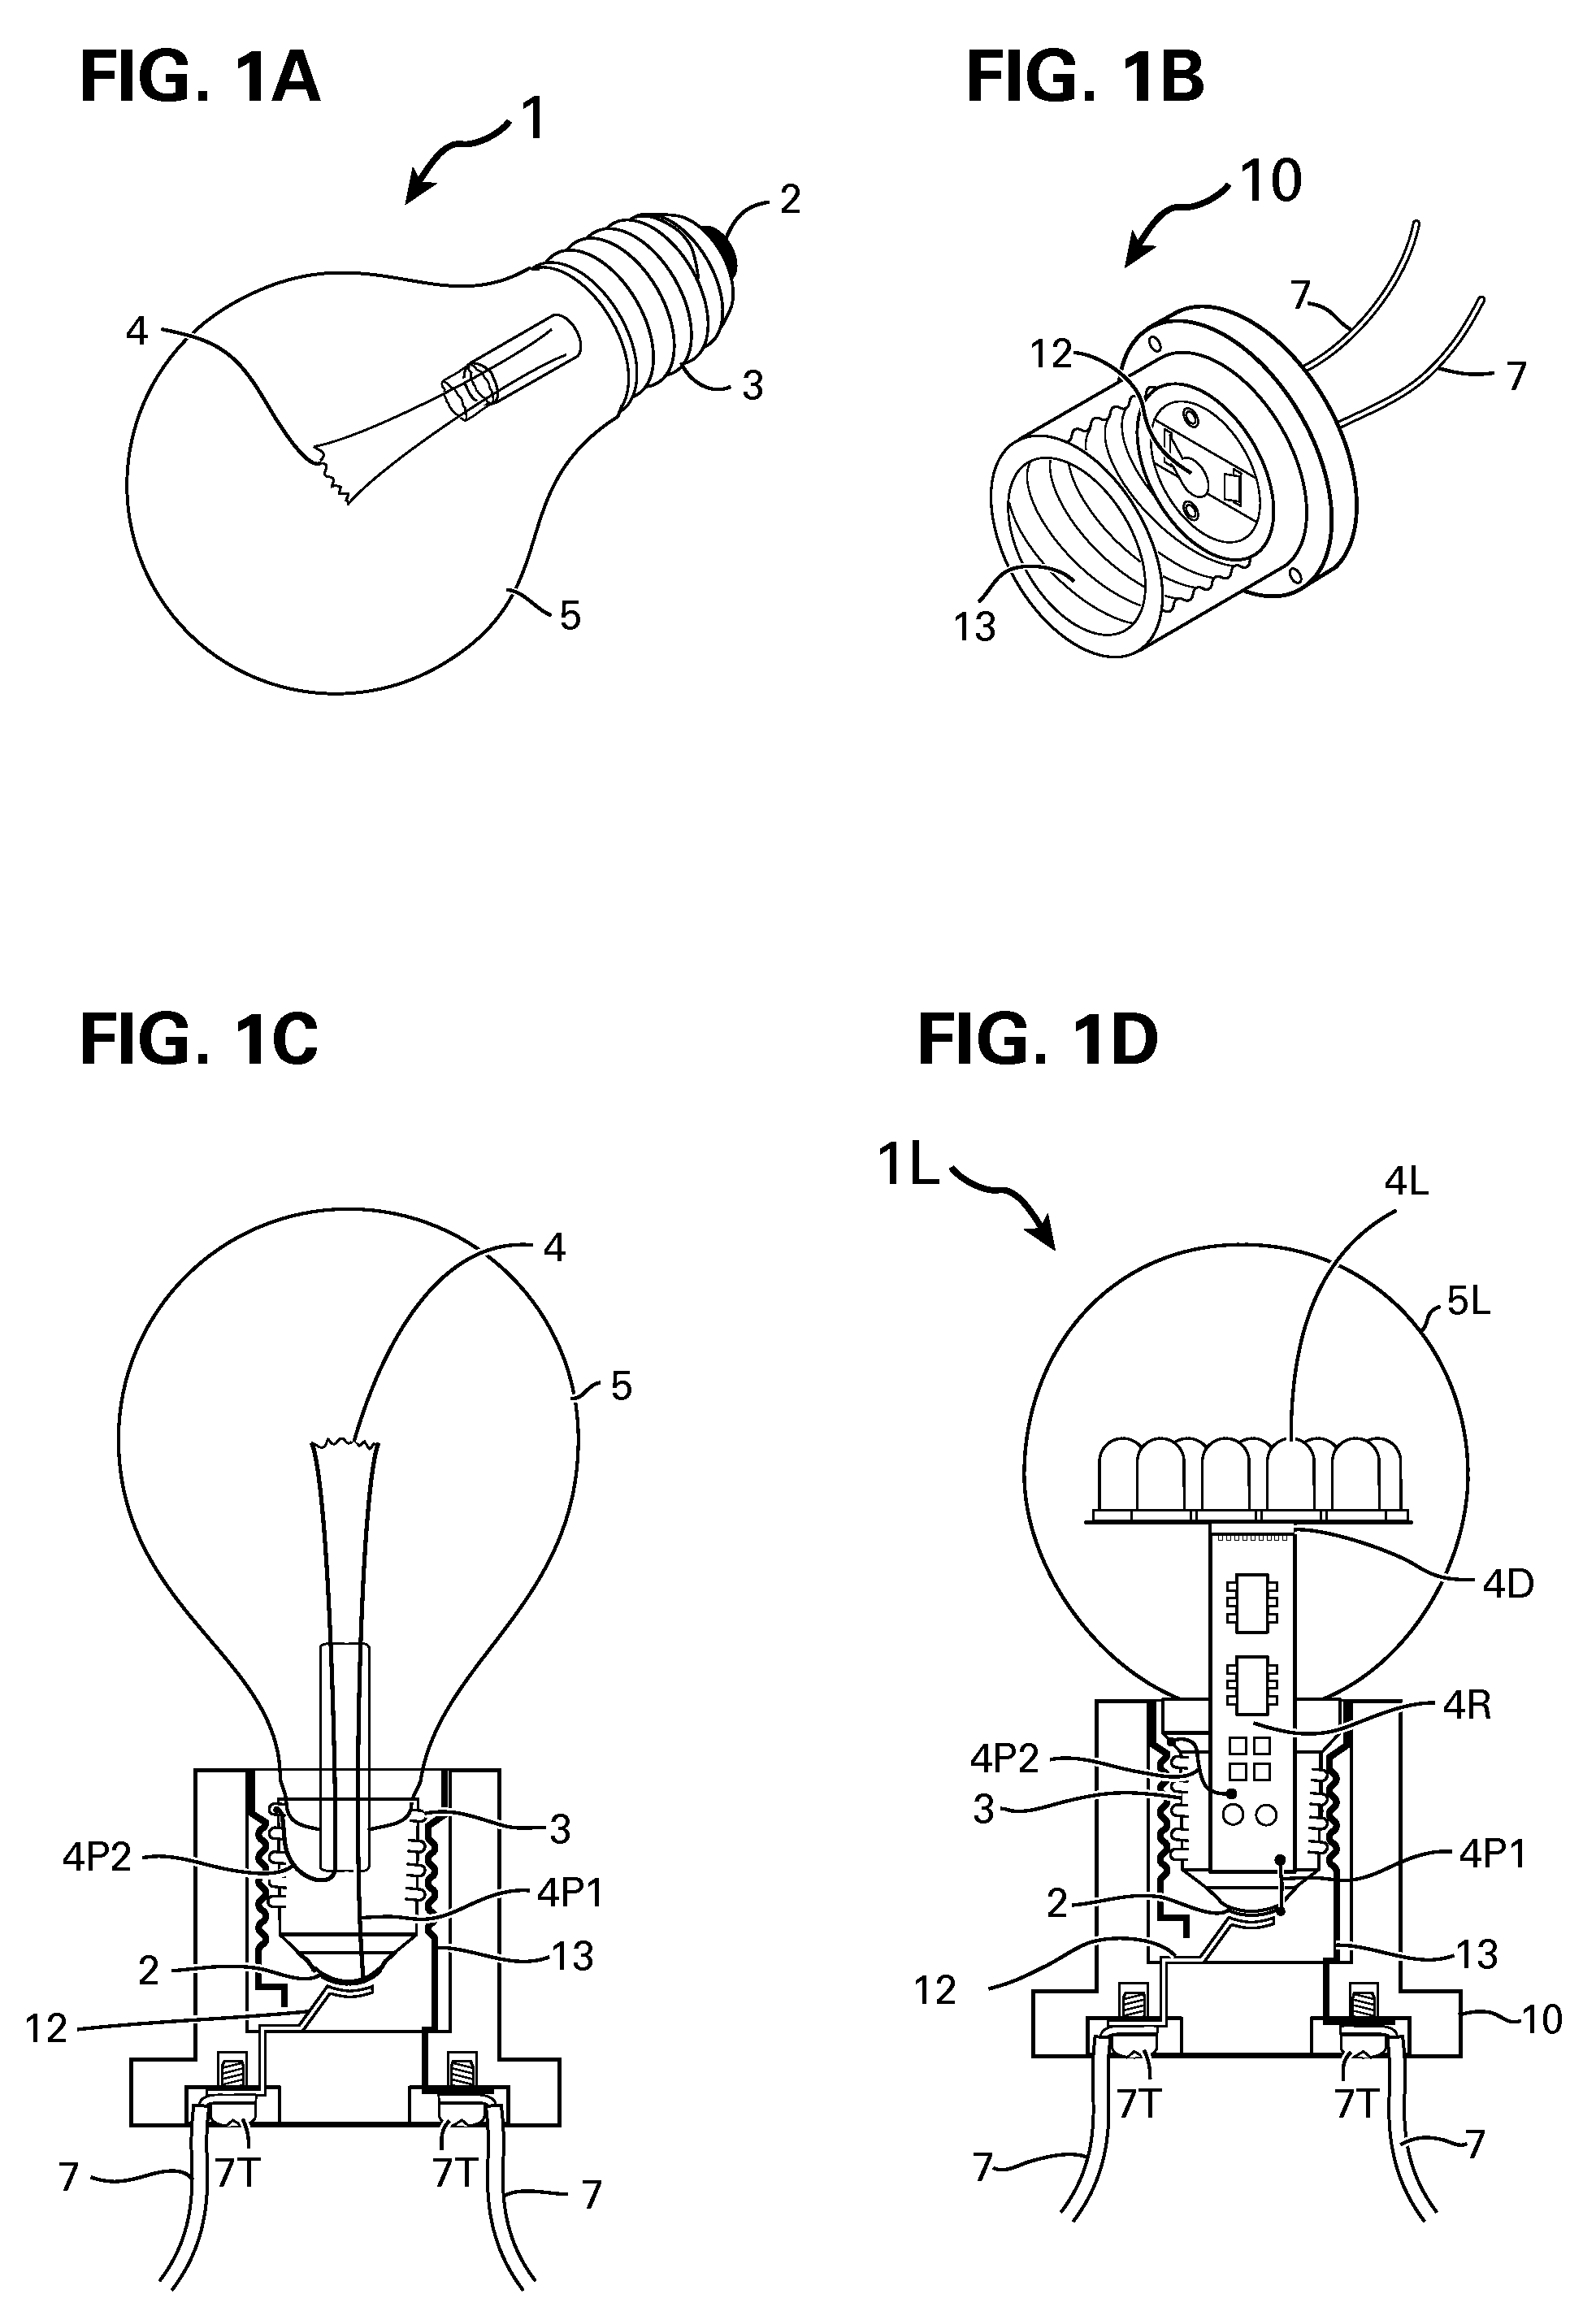 Method and apparatus for propagating optical signals along with power feed to illuminators and electrical appliances